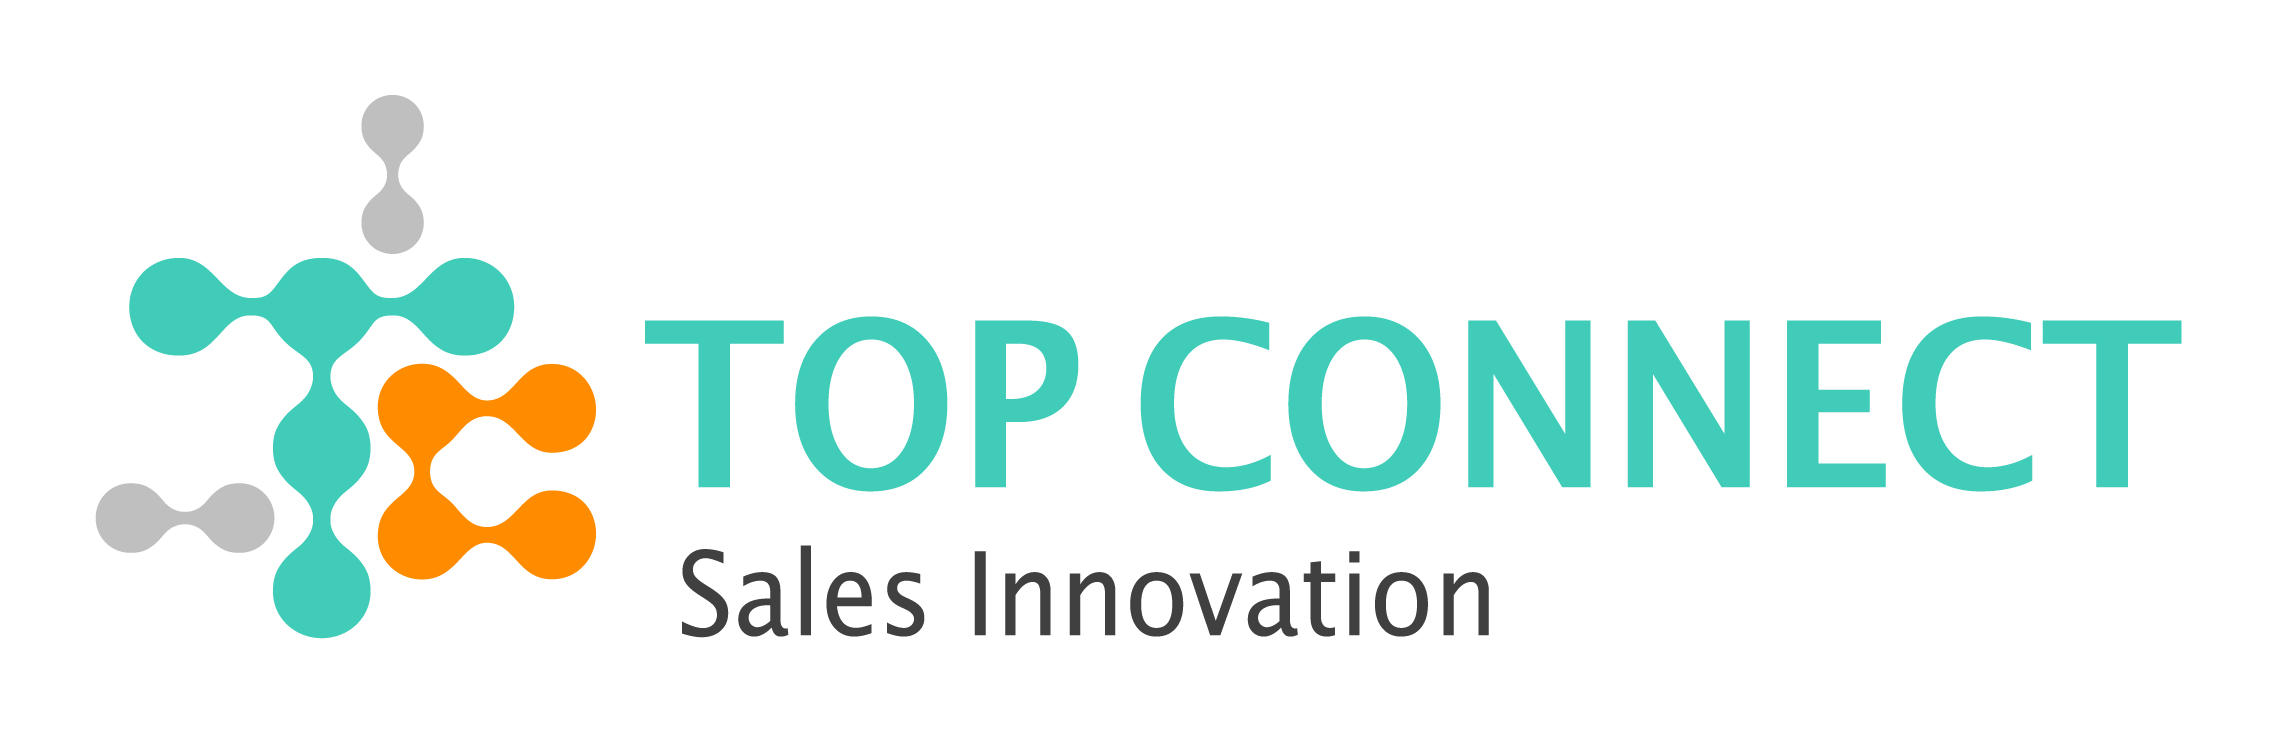 TOP CONNECT株式会社